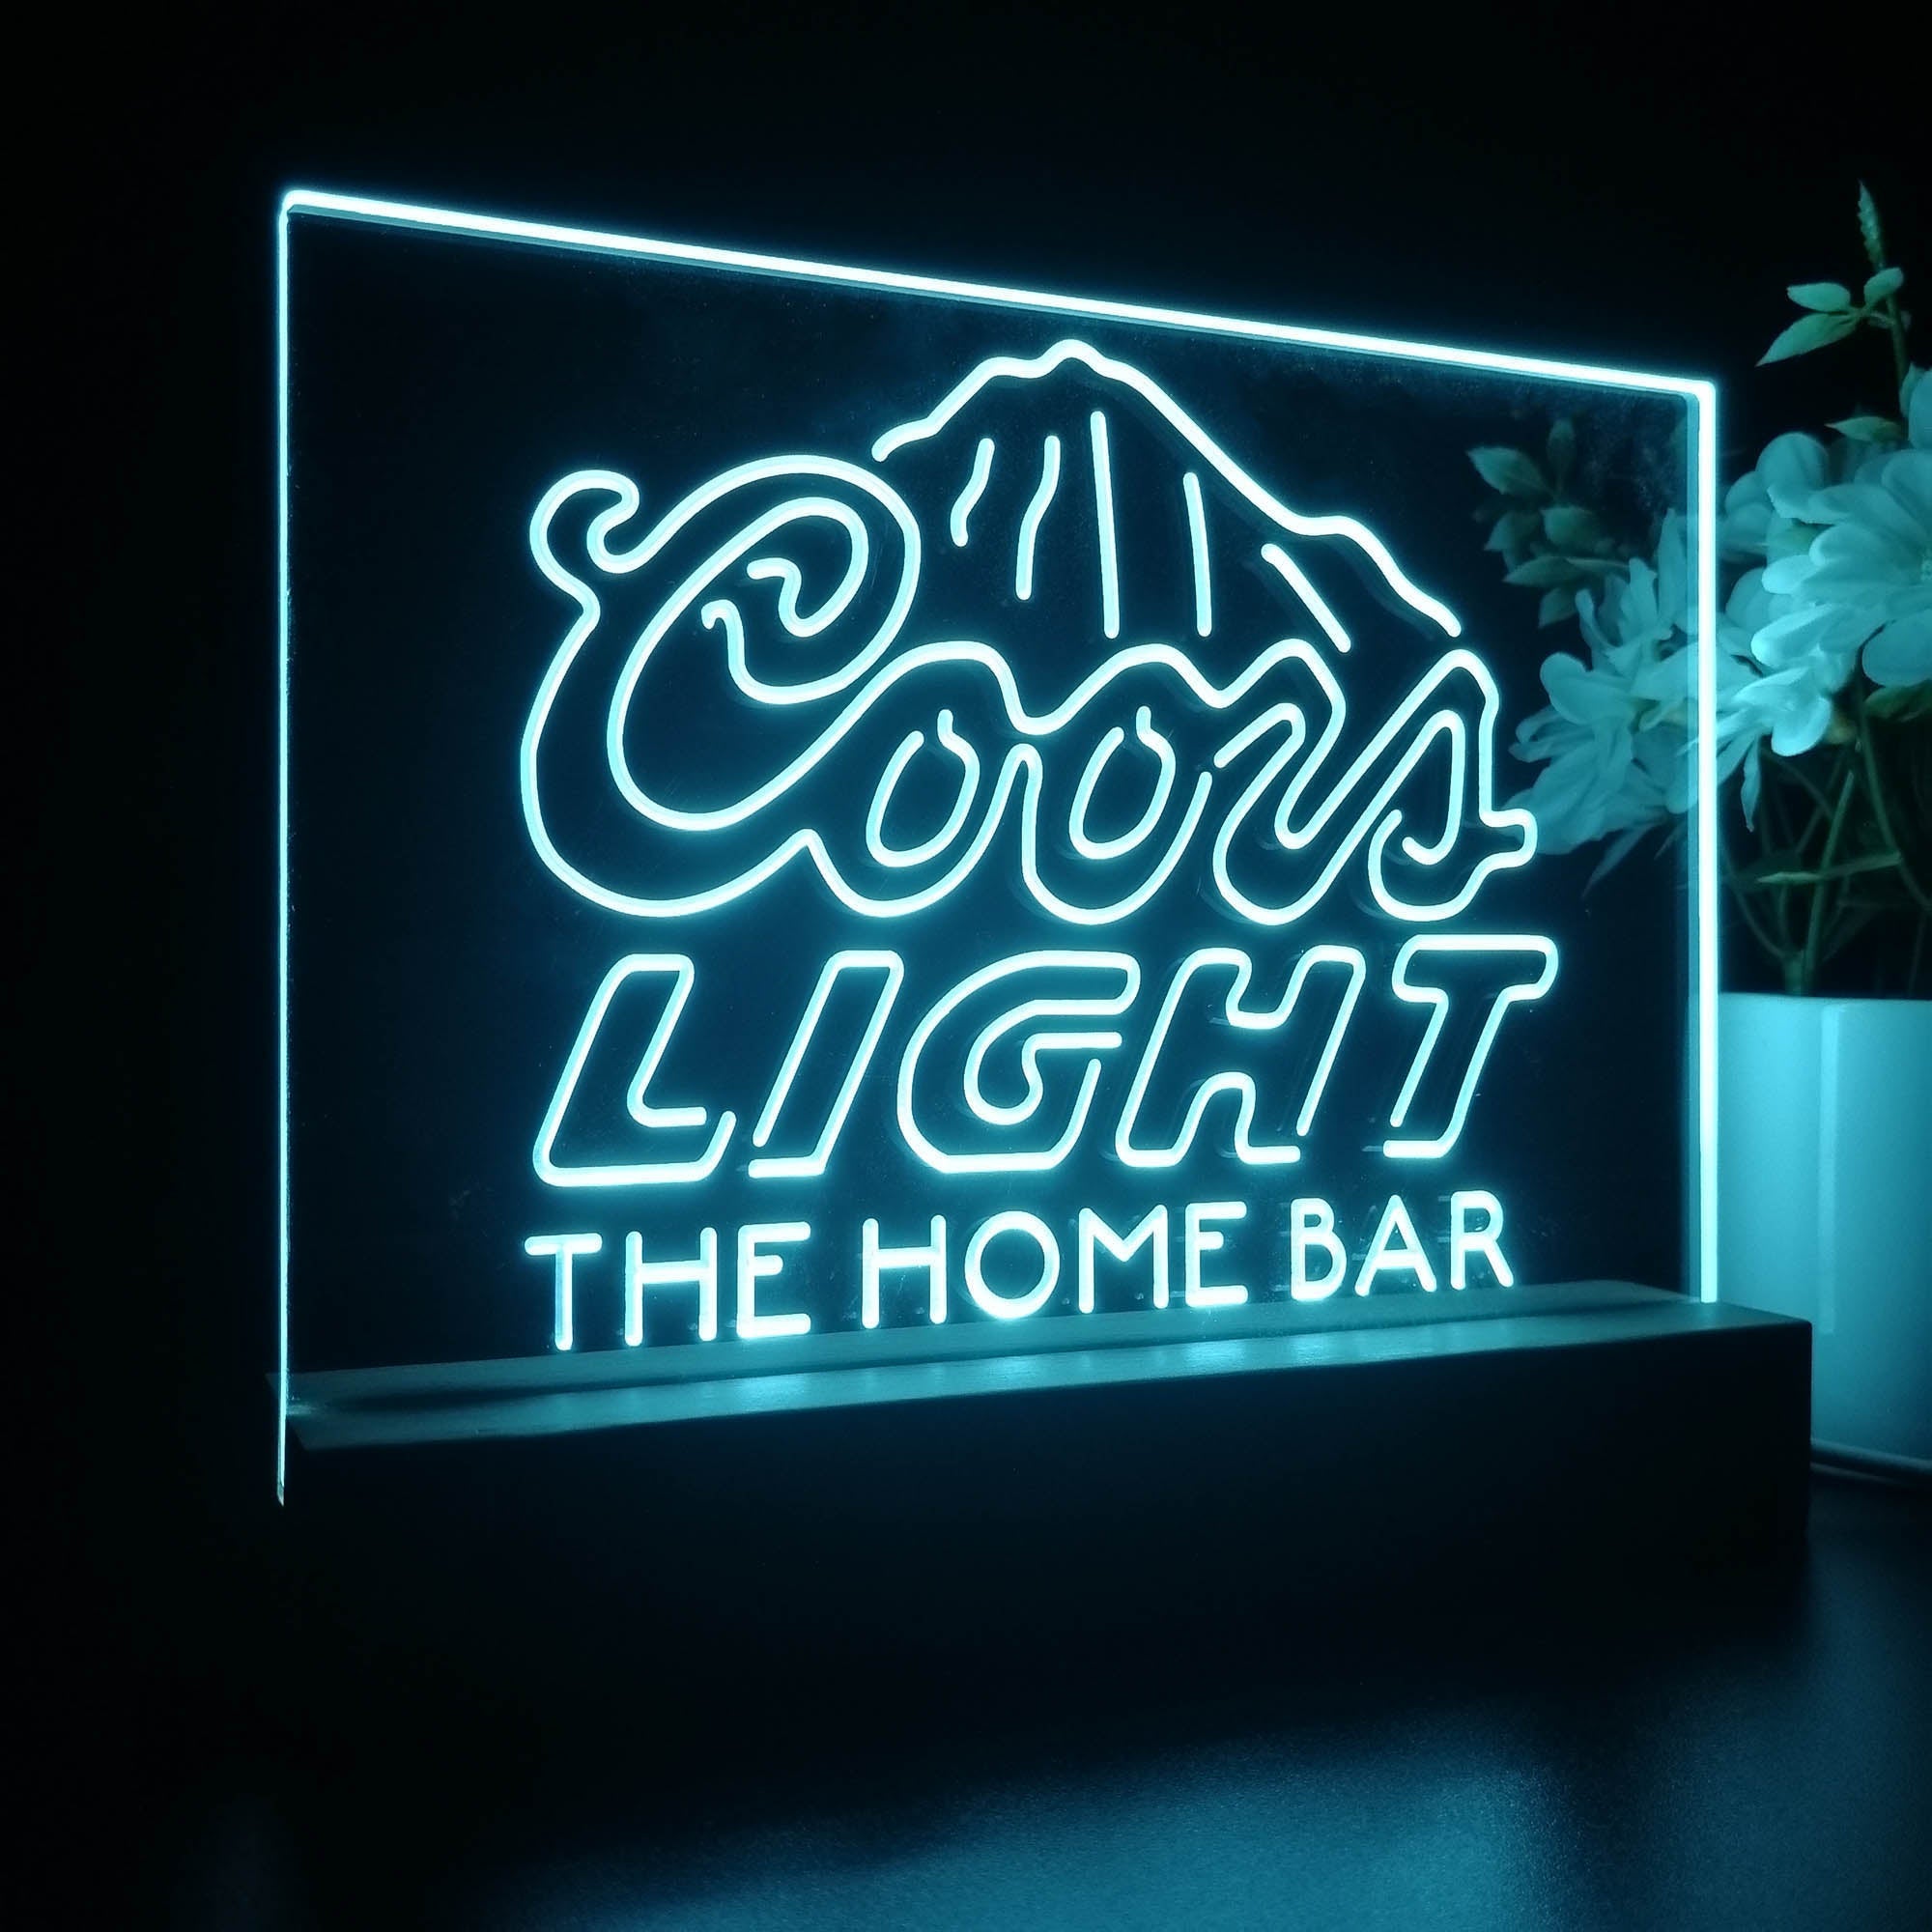 Personalized Coors,Coors Light Souvenir Neon LED Night Light Sign